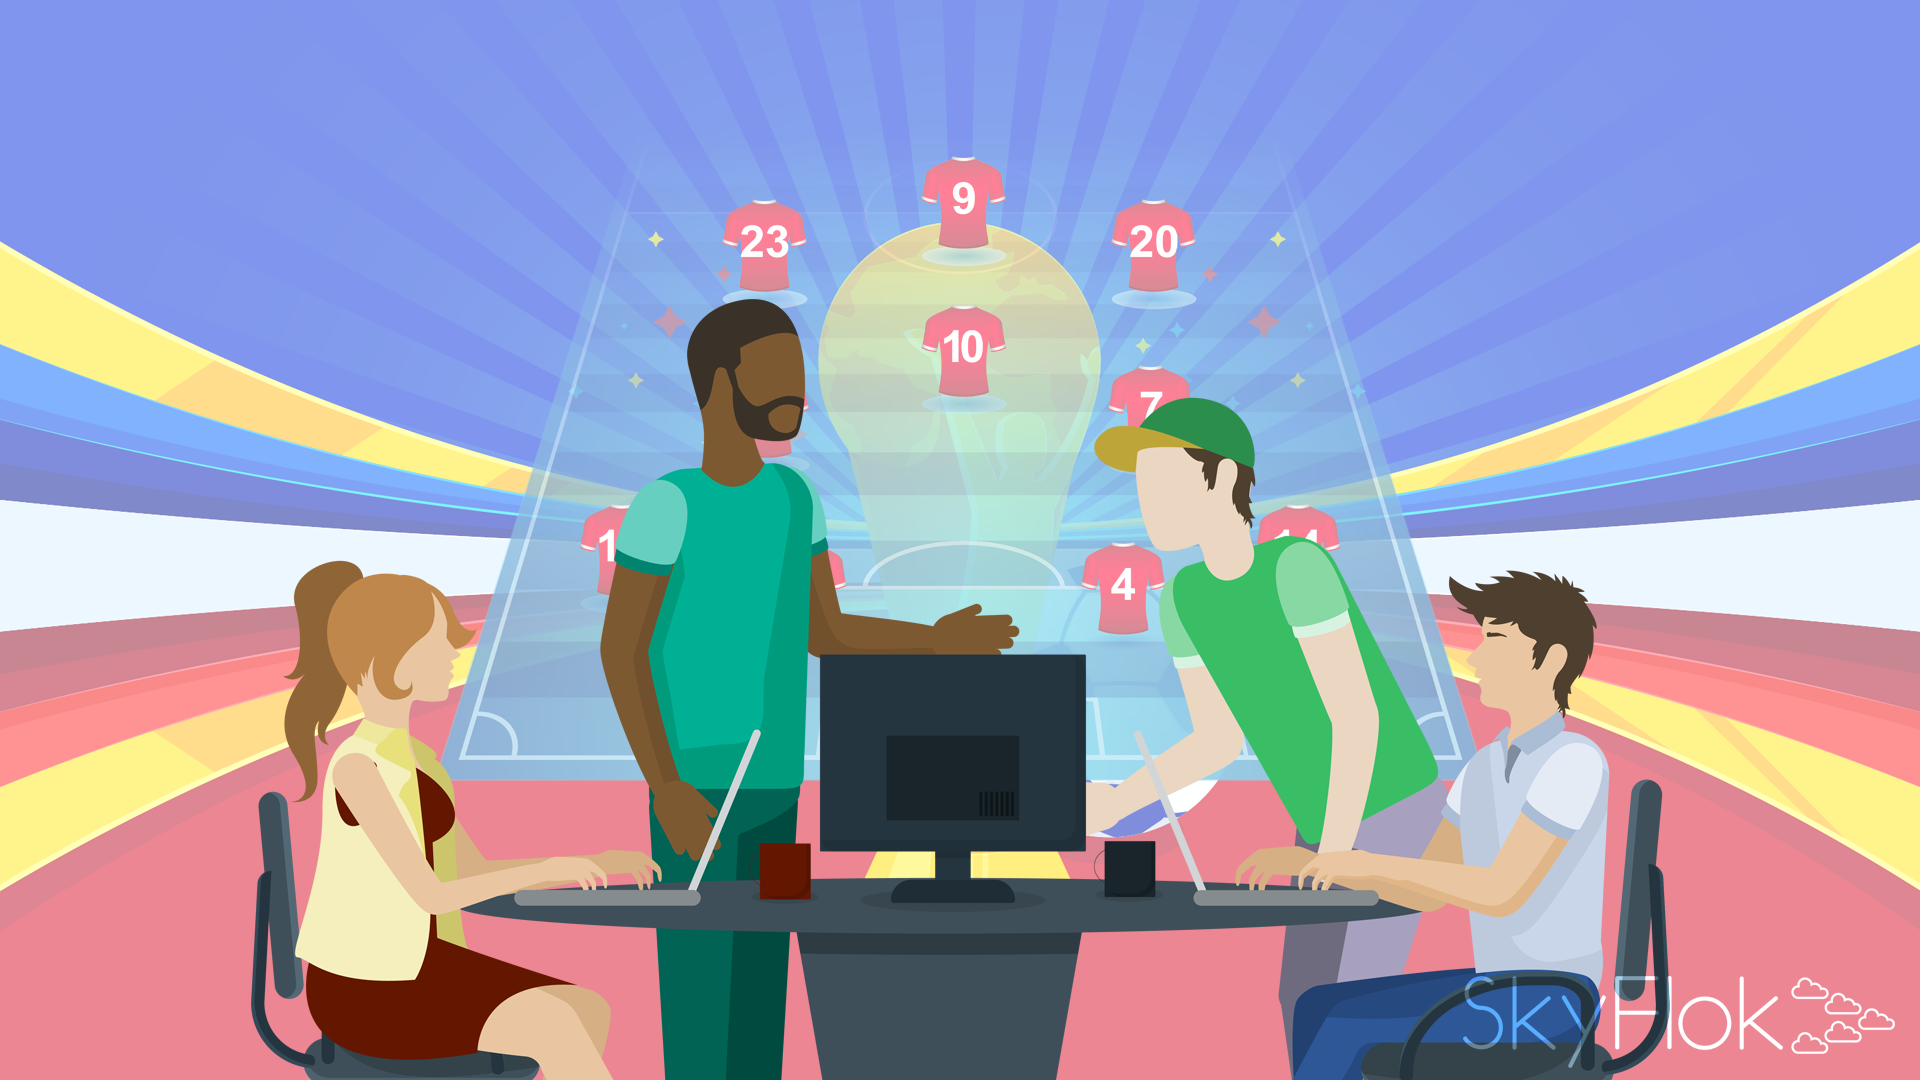 As the World Cup kicks off, here are 10 lessons IT teams can learn from the teams on the field